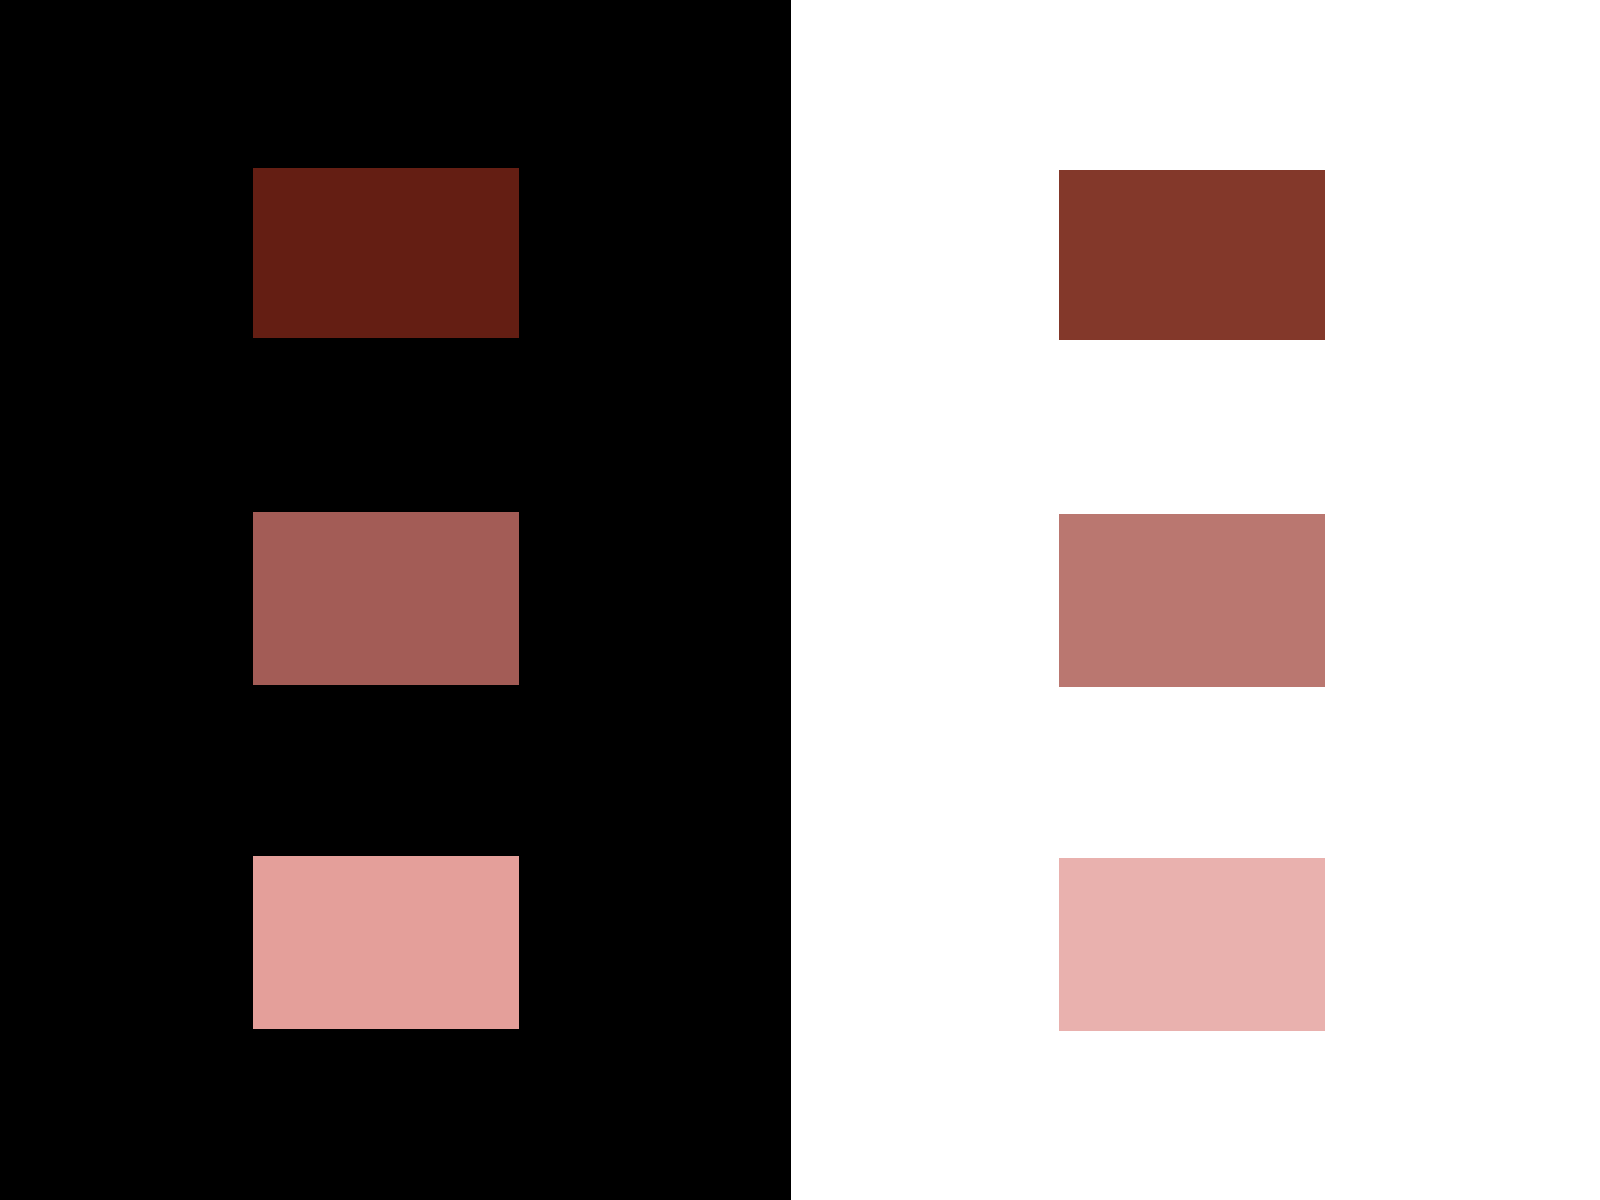 Image showing effect of contrast on color perception